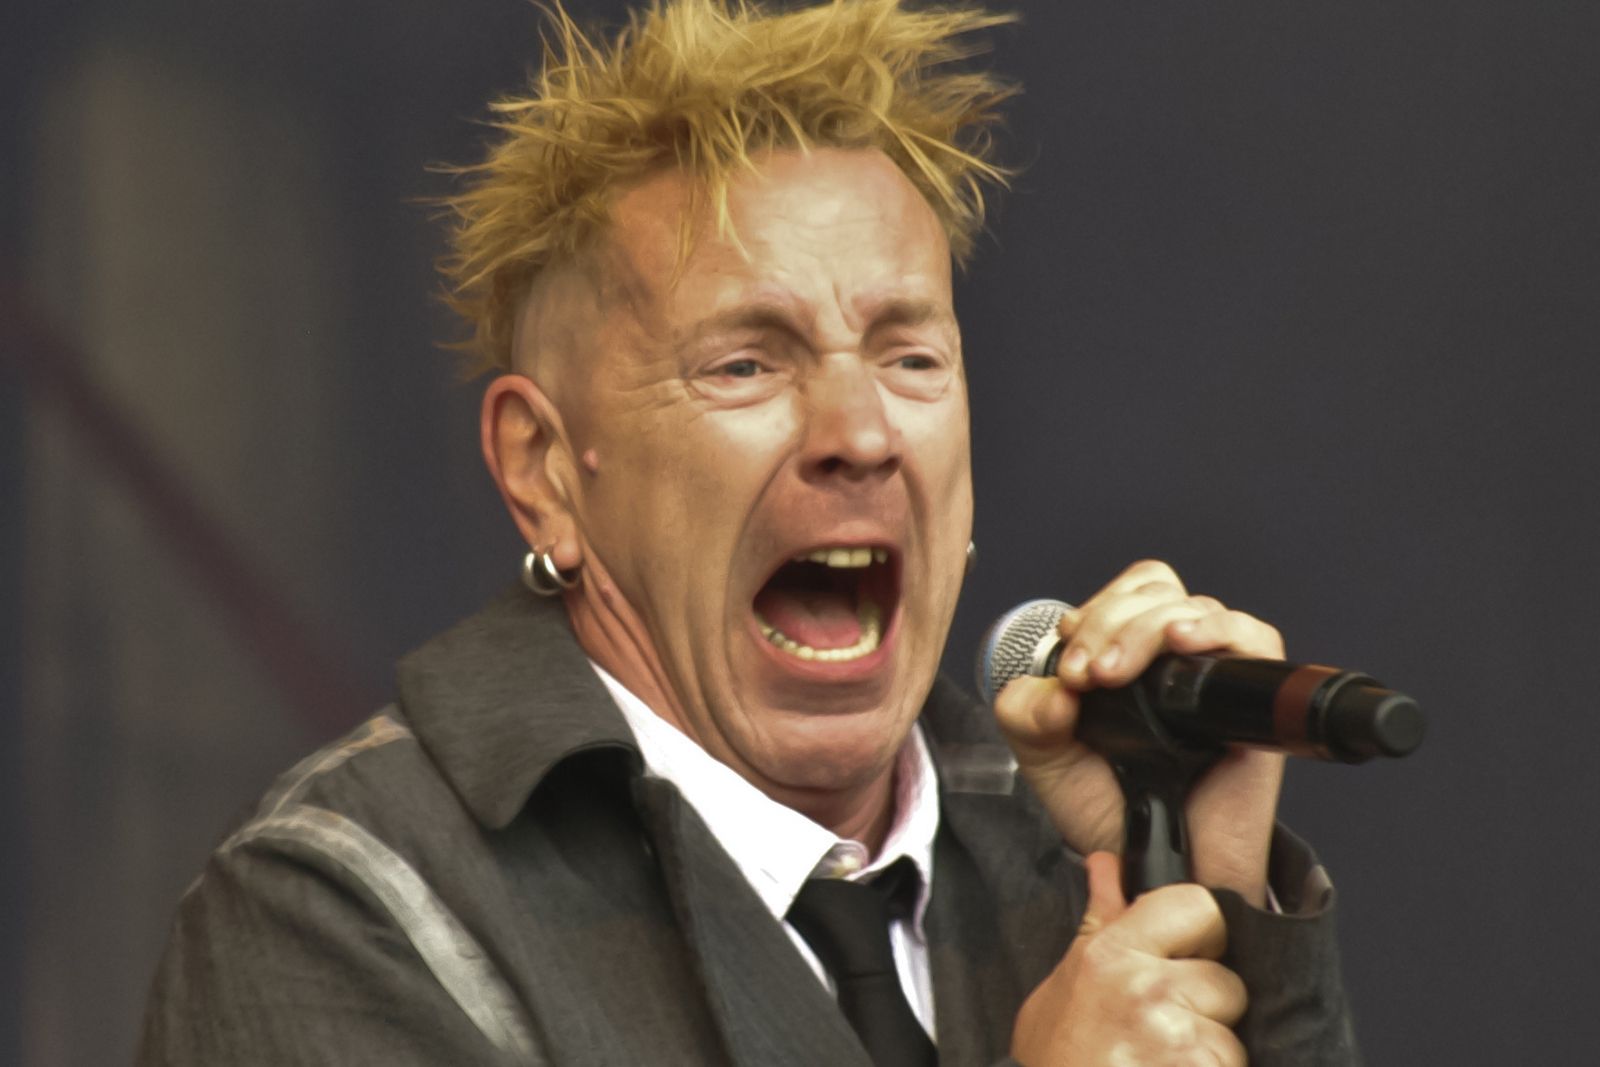 sex pistols’ john lydon addicted to ipad apps spends 10 000 on in app purchases image 1